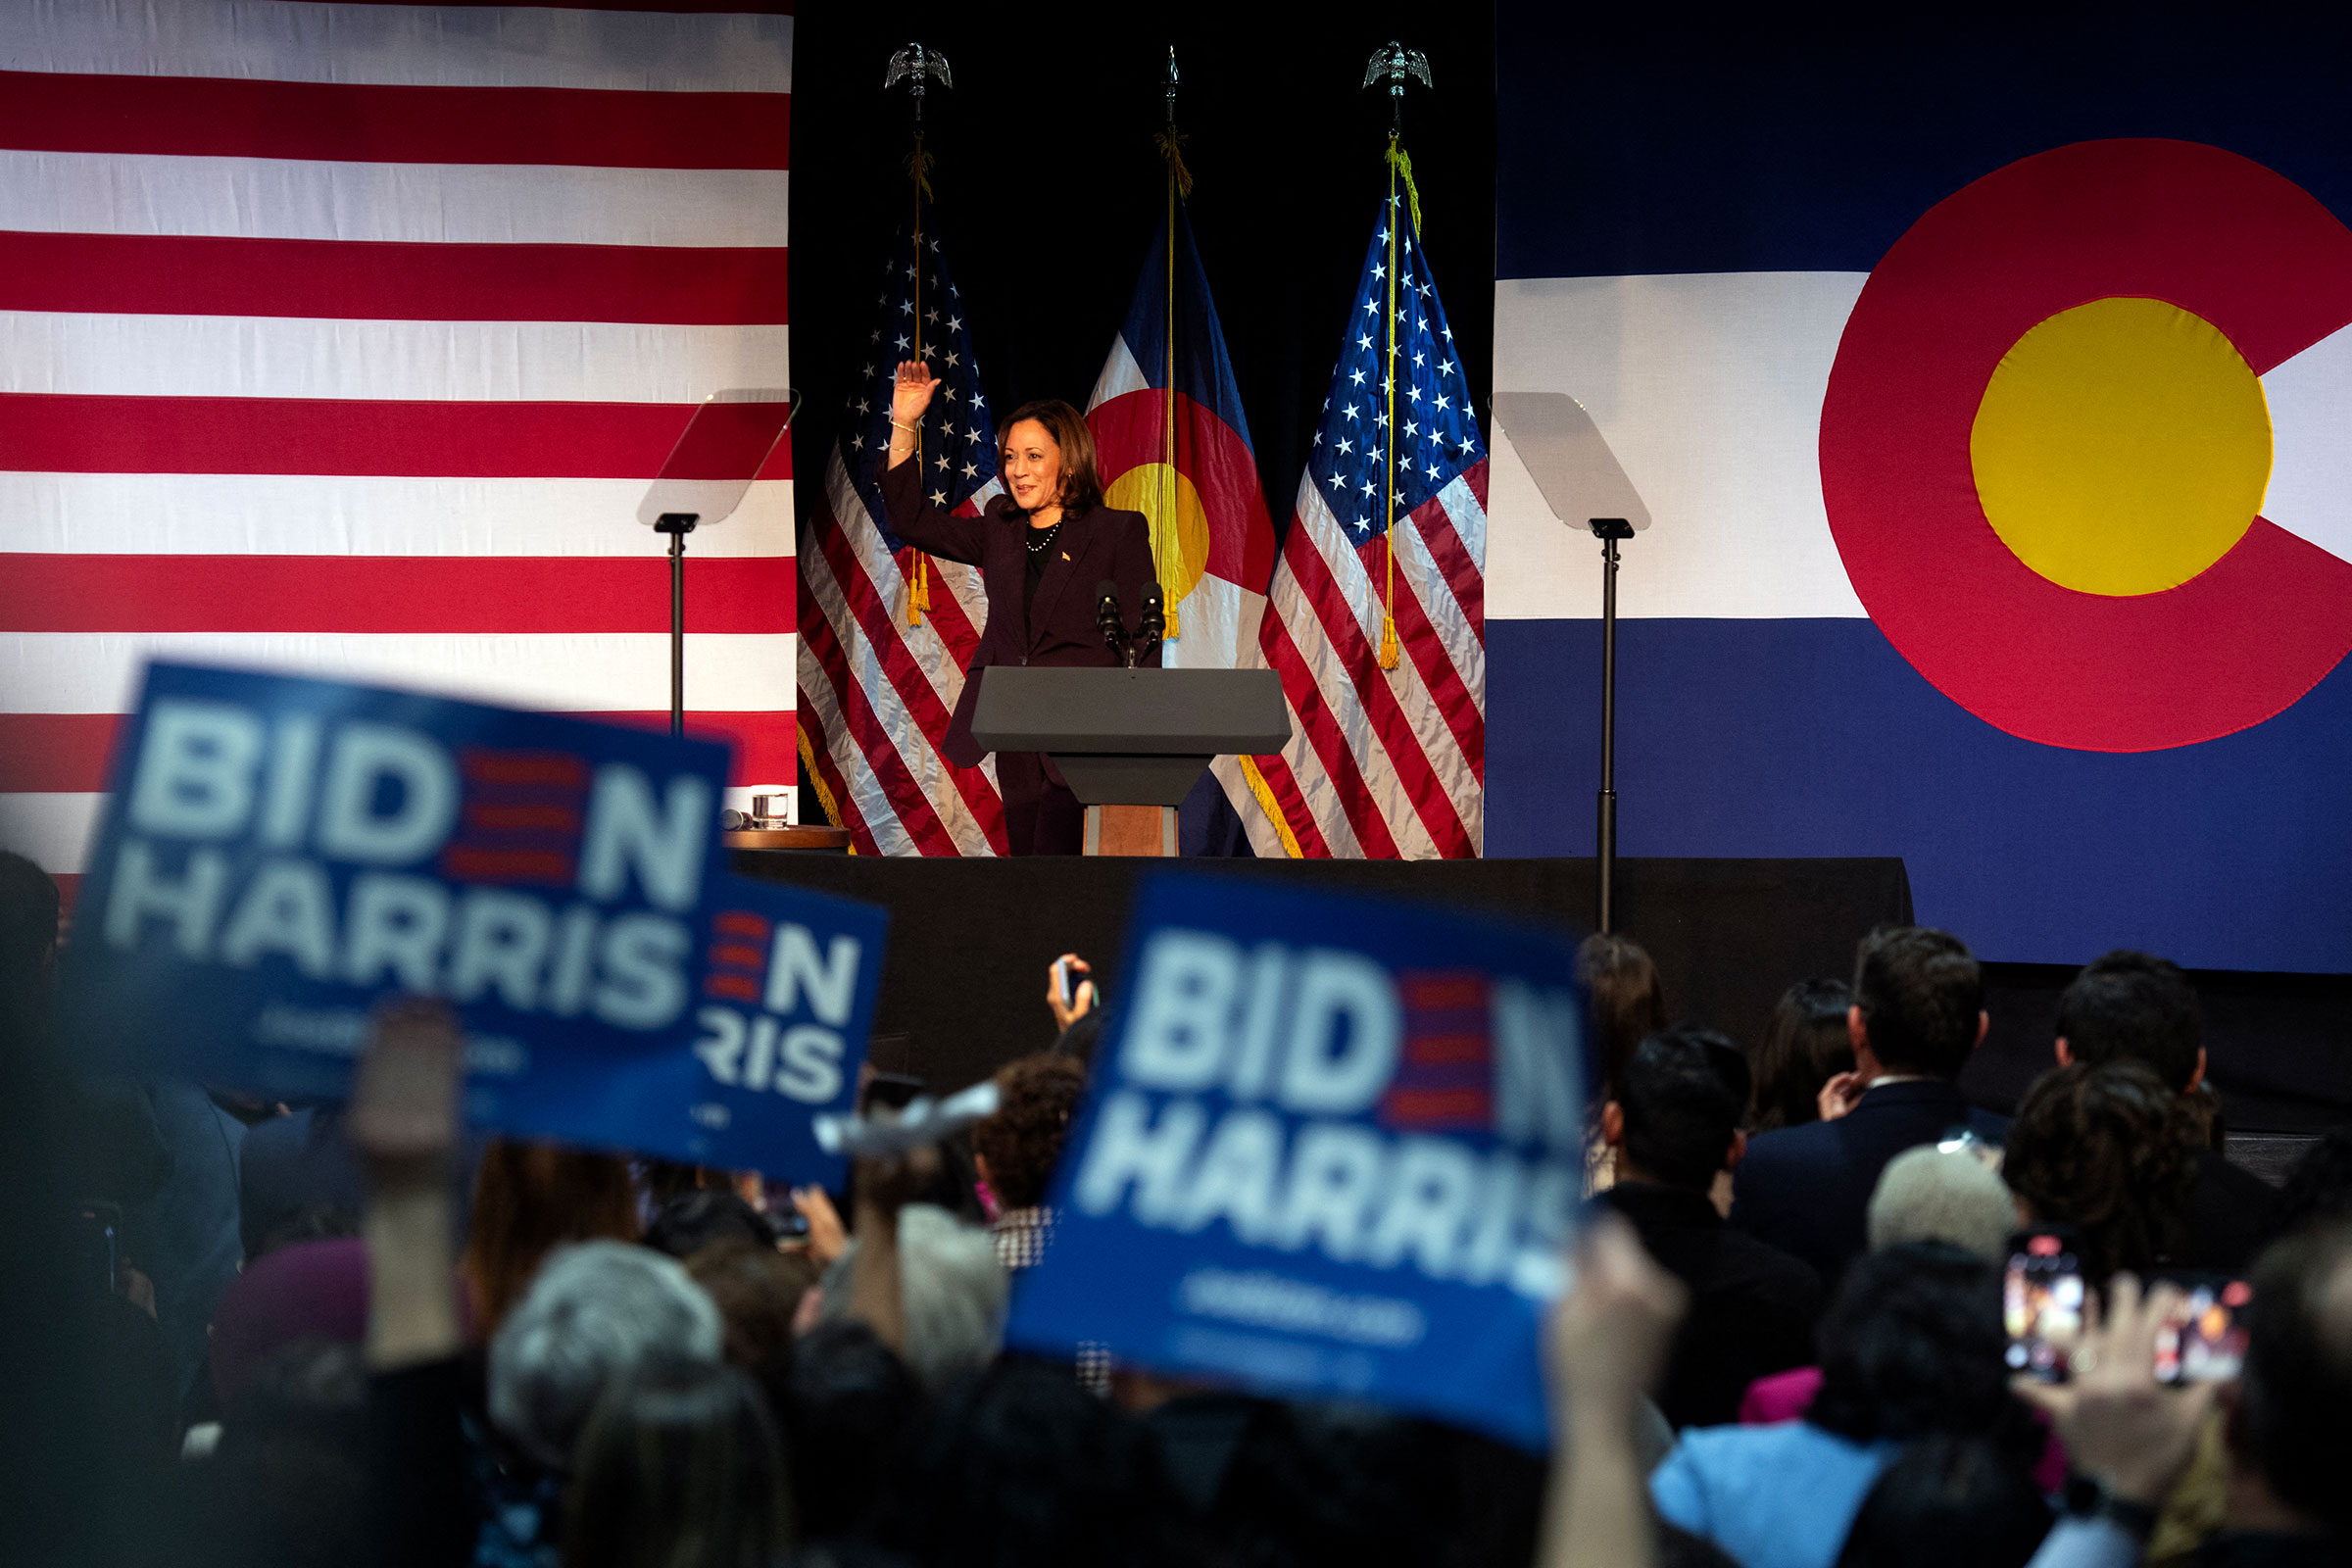 Vice President Kamala Harris waves to supporters at the start of a campaign rally at Reelworks in Denver, Colorado, on Tuesday.